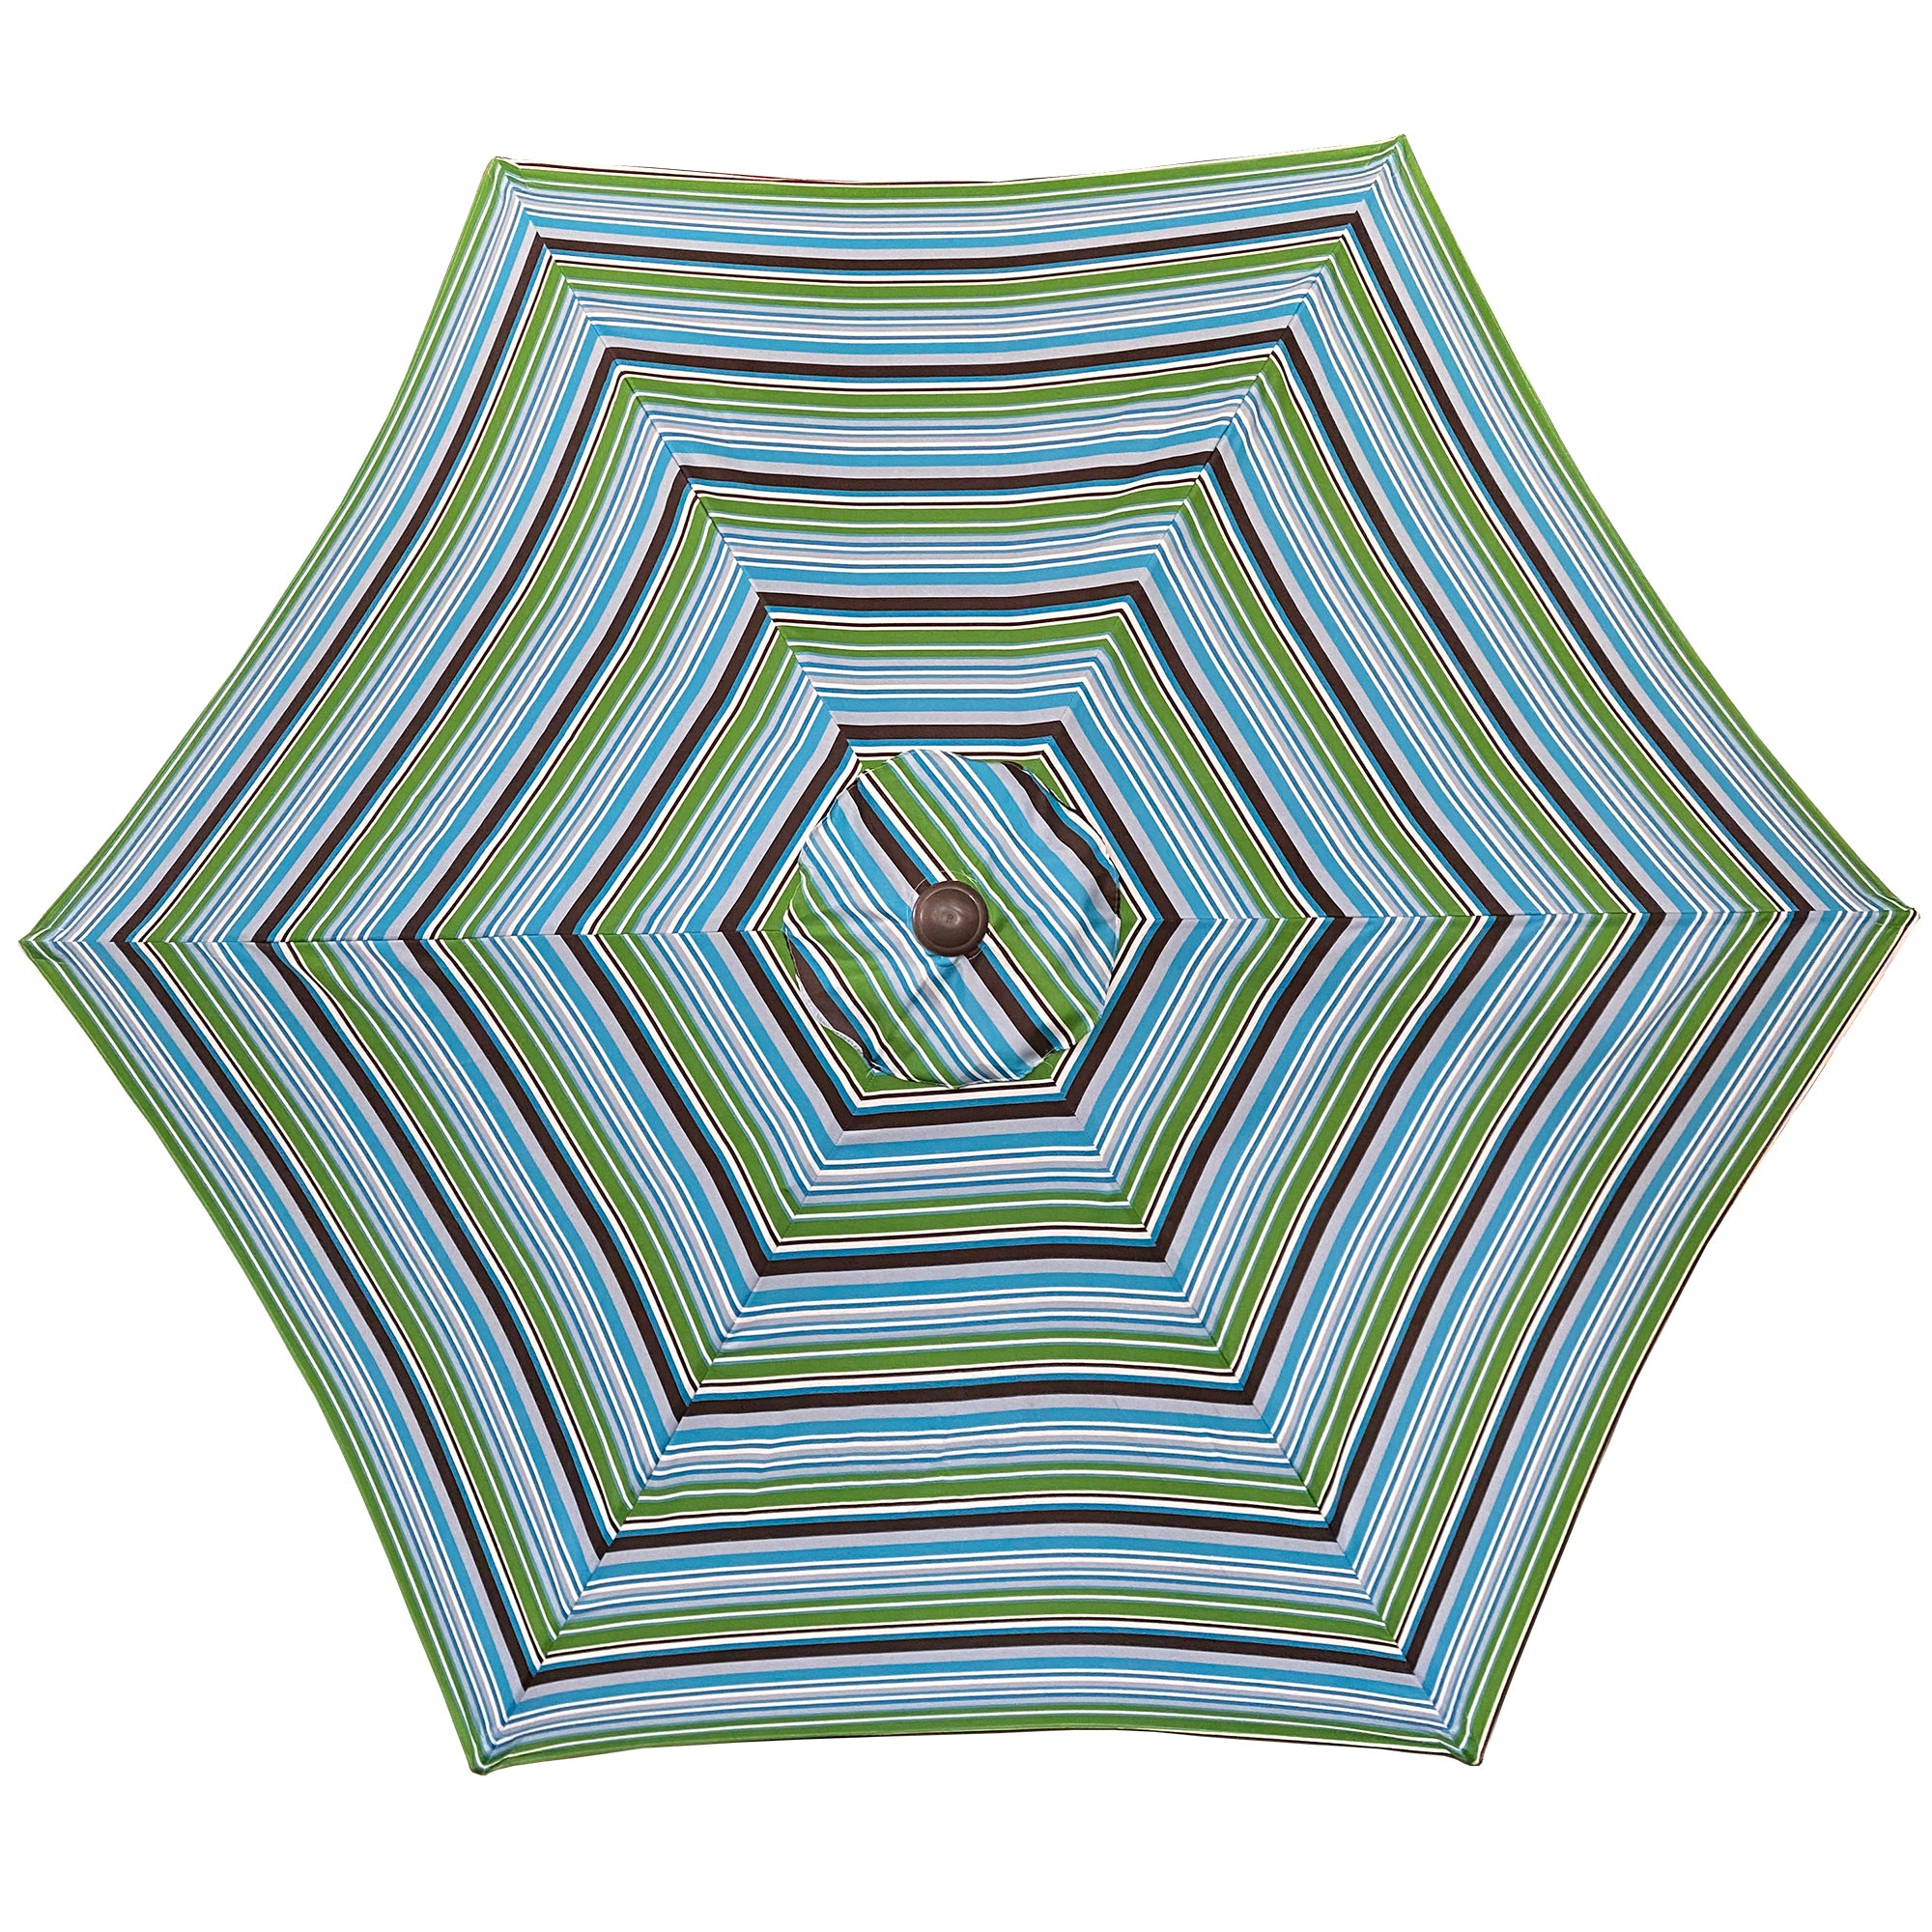 Outdoor Patio 8.6-Feet Market Table Umbrella with Push Button Tilt and Crank, Blue Stripes[Umbrella Base is not Included]